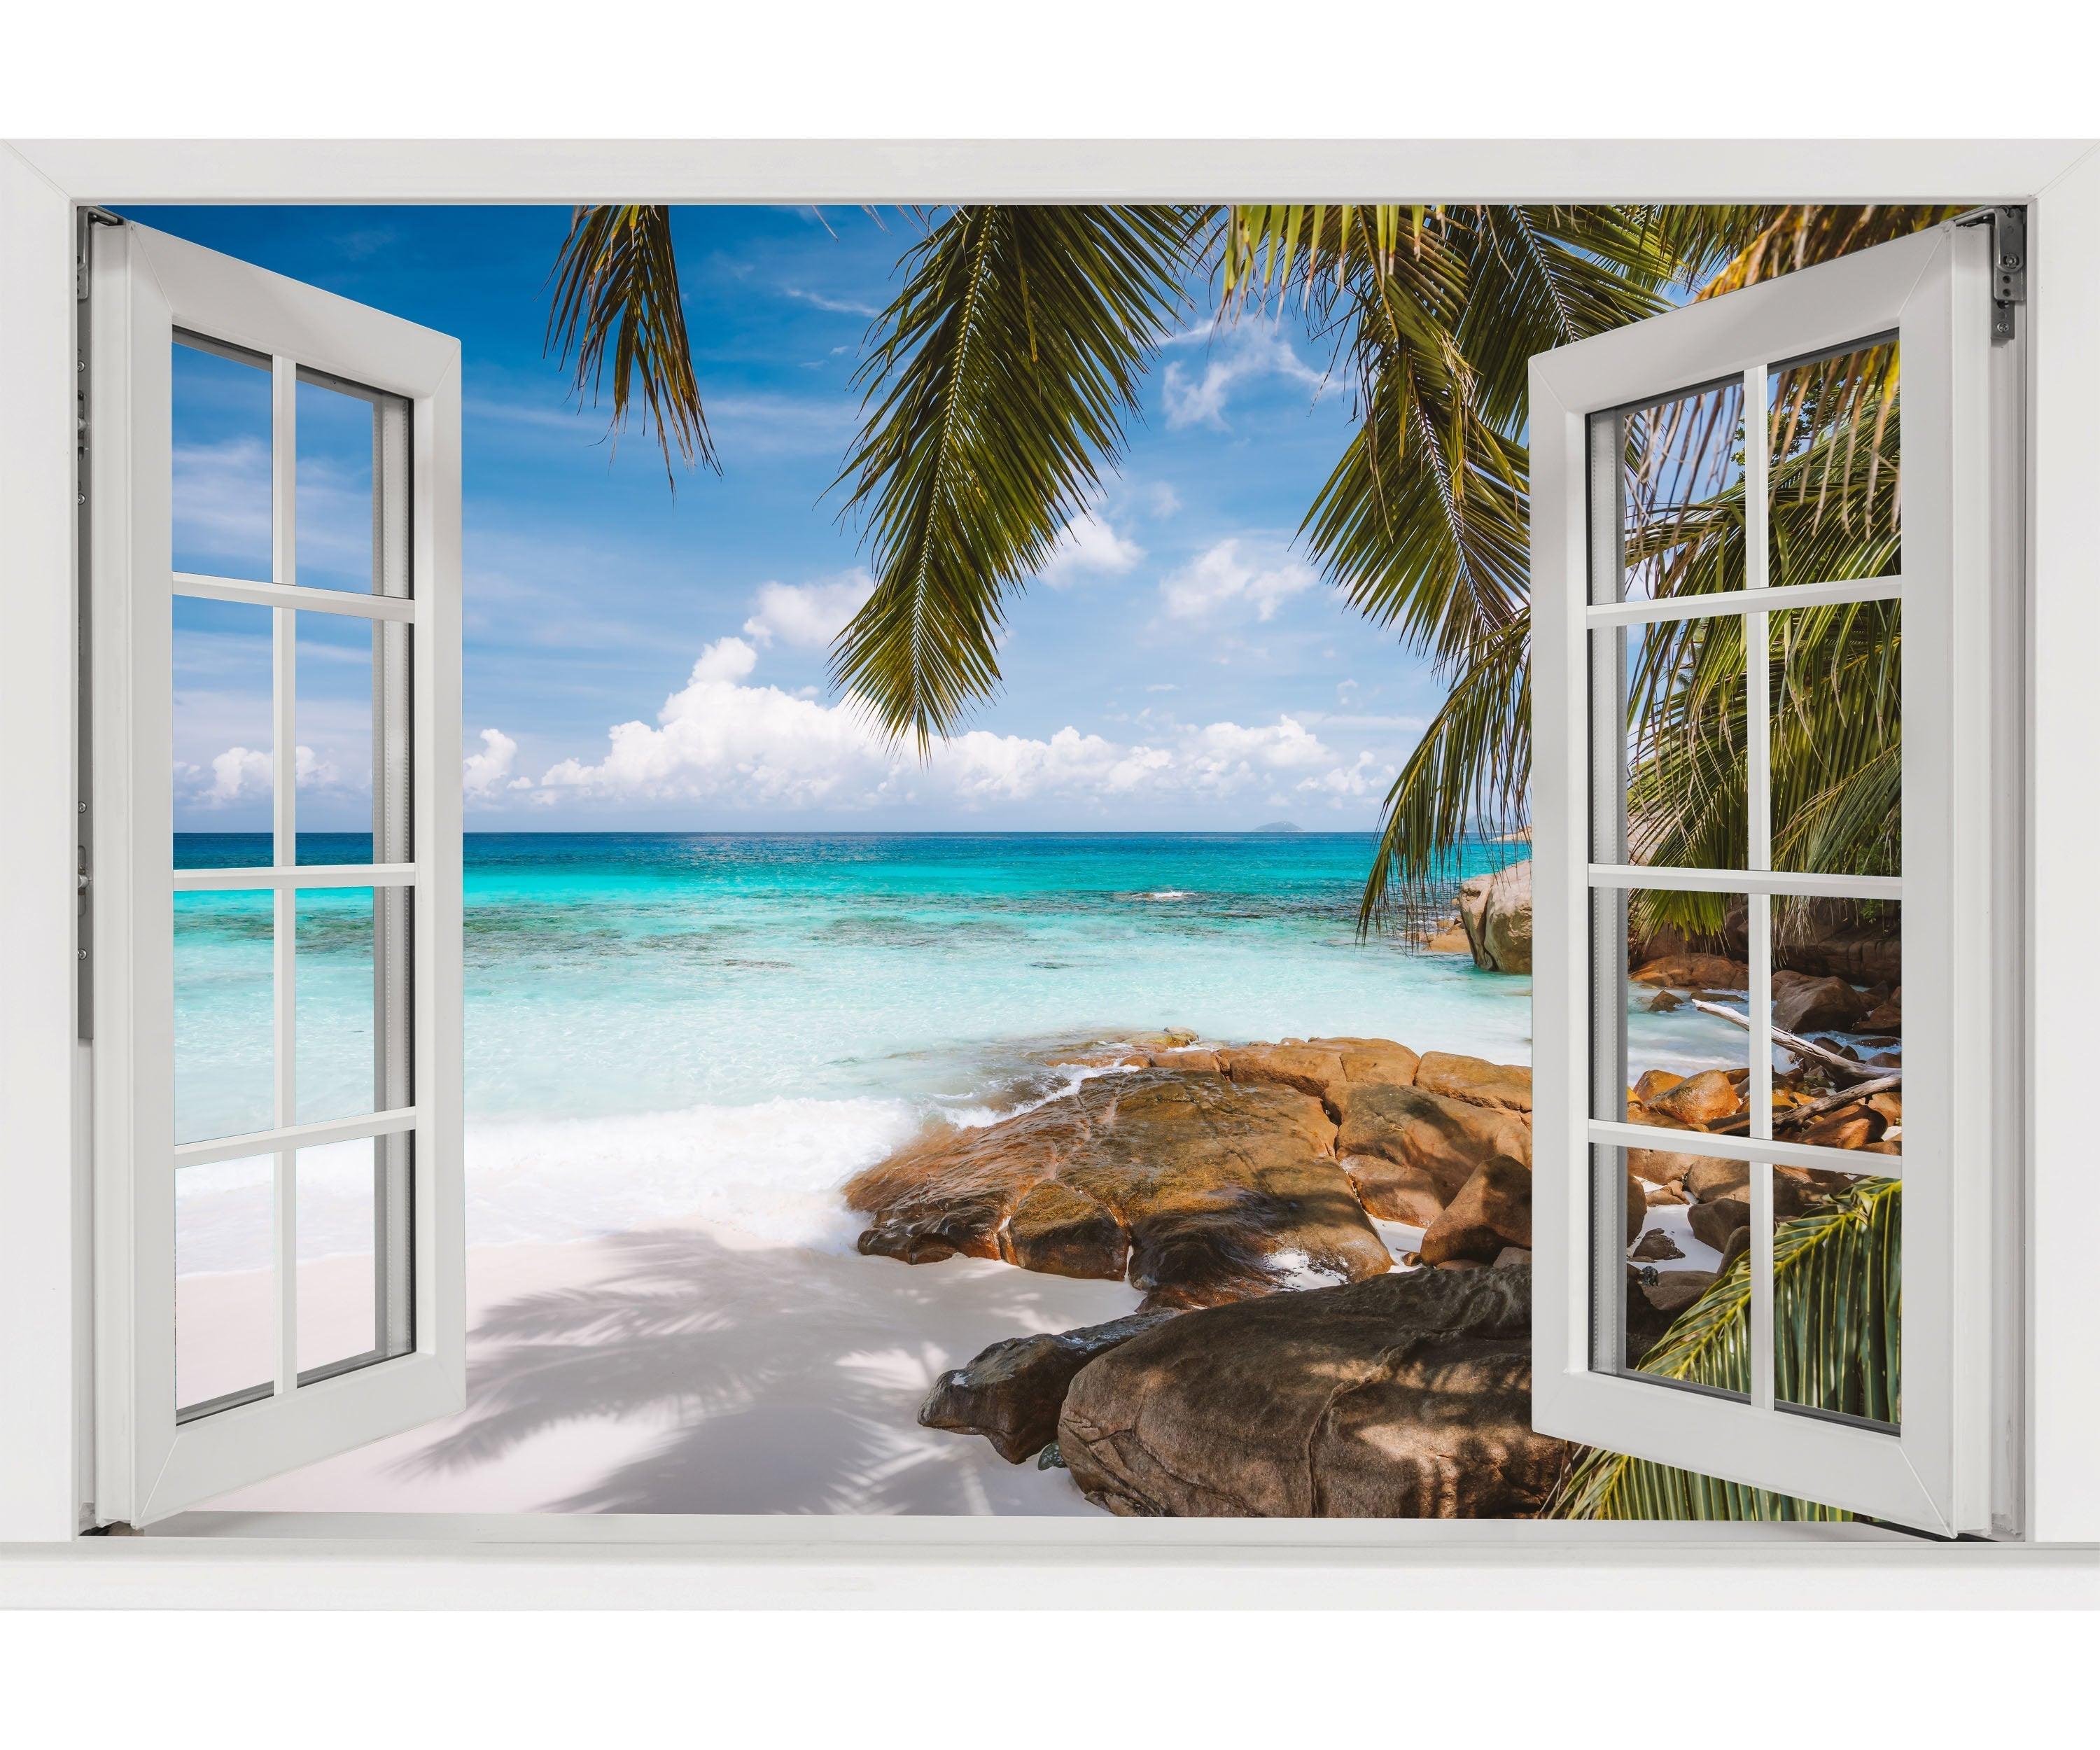 Window Scape Tropical #7 Window Decal Sticker Mural Beach Removable Fabric Window Frame Office Bedroom 3D